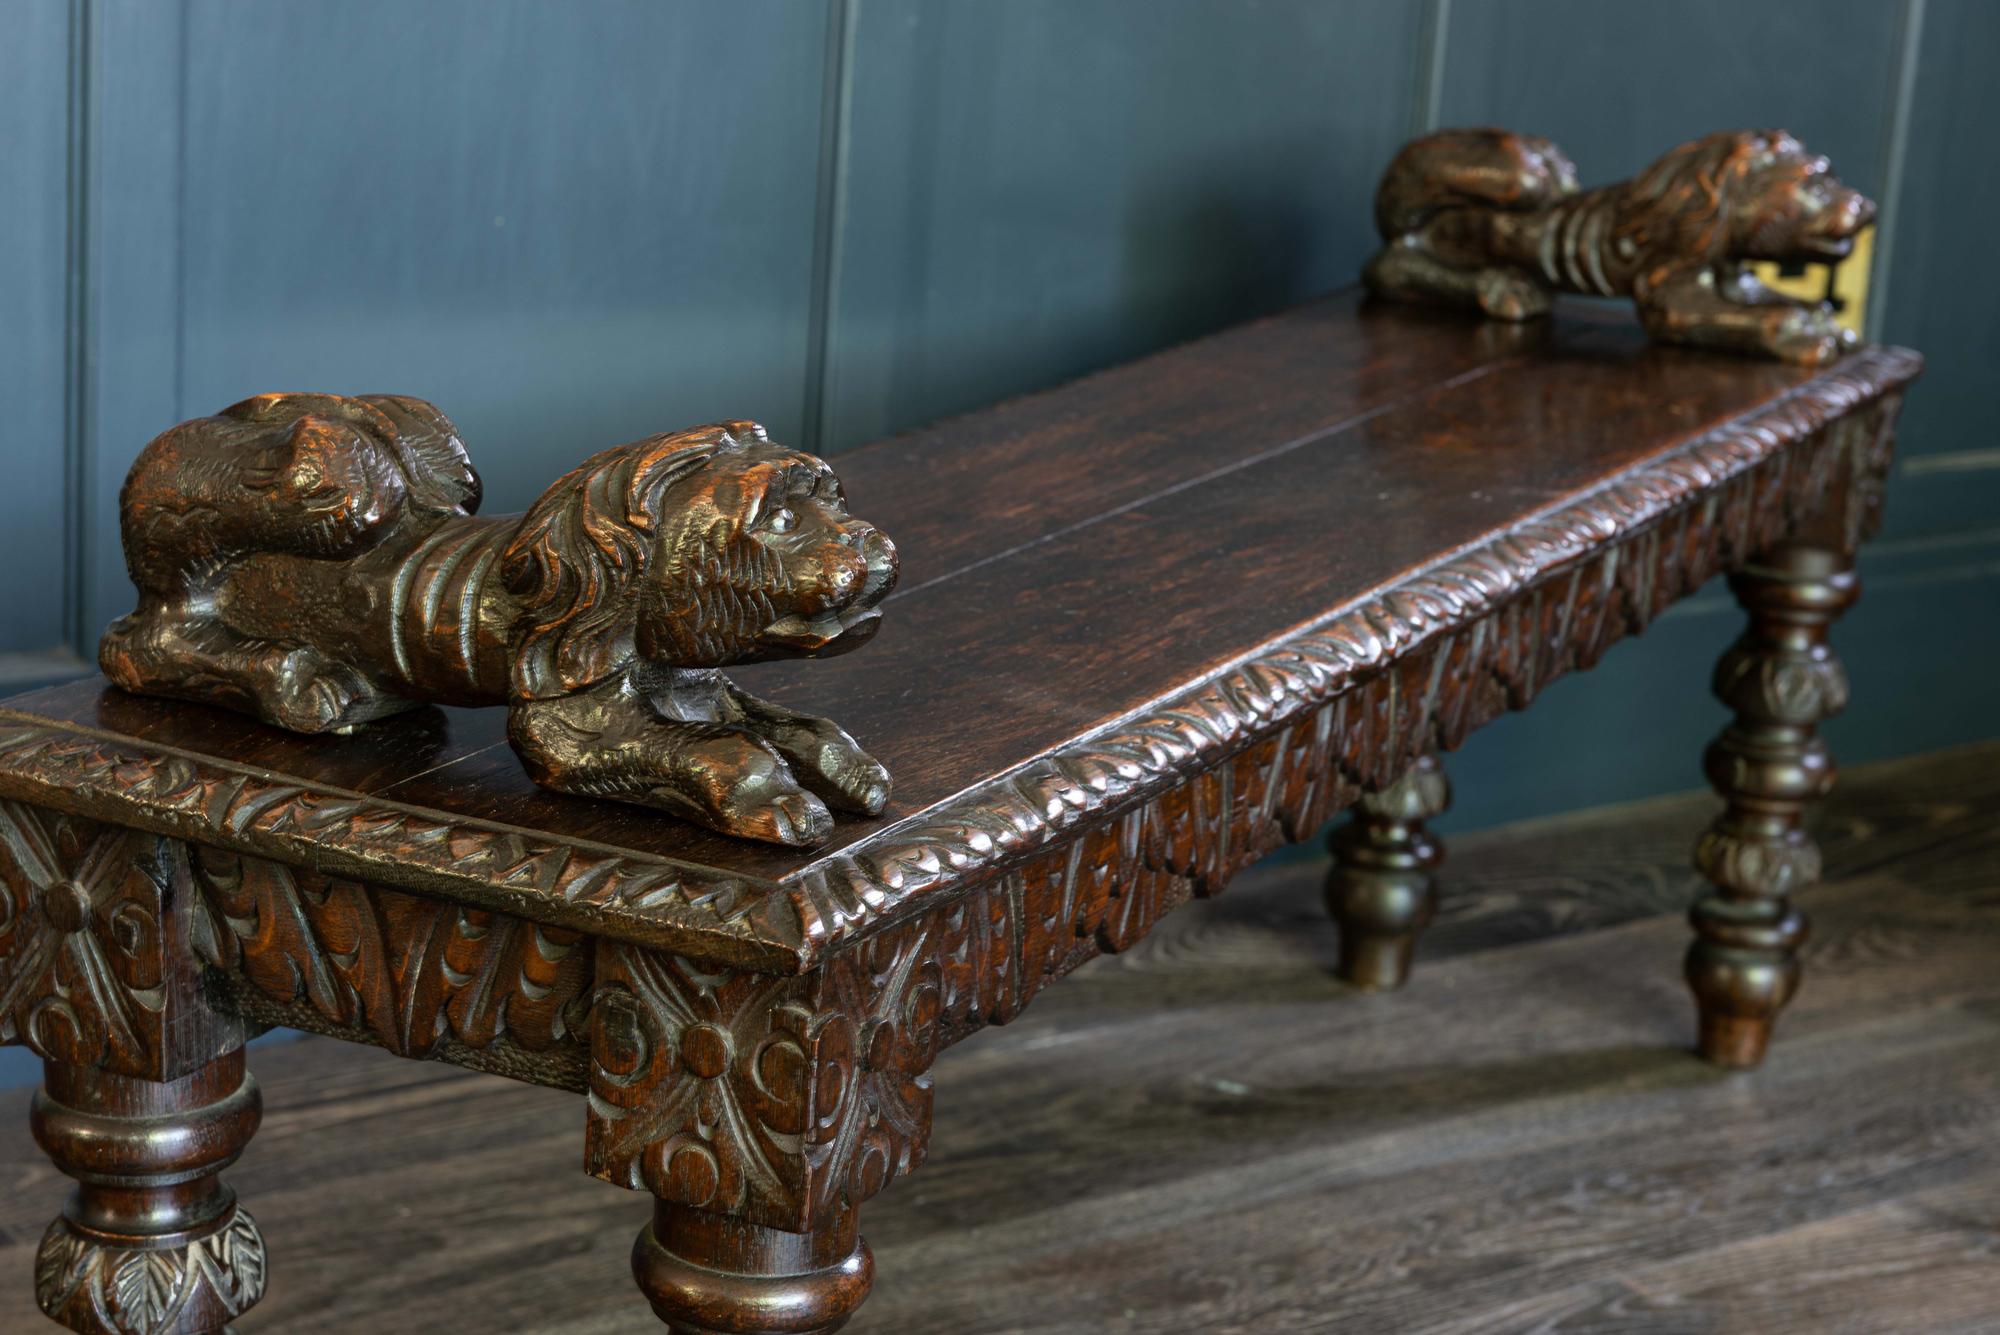 English oak hand carved bench settle with recumbent carved lions, early 19th century
Two plank oak carved beveled edge top with carved decorative apron and legs, square pegged construction. Featuring a pair of carved recumbent lions which are pegged